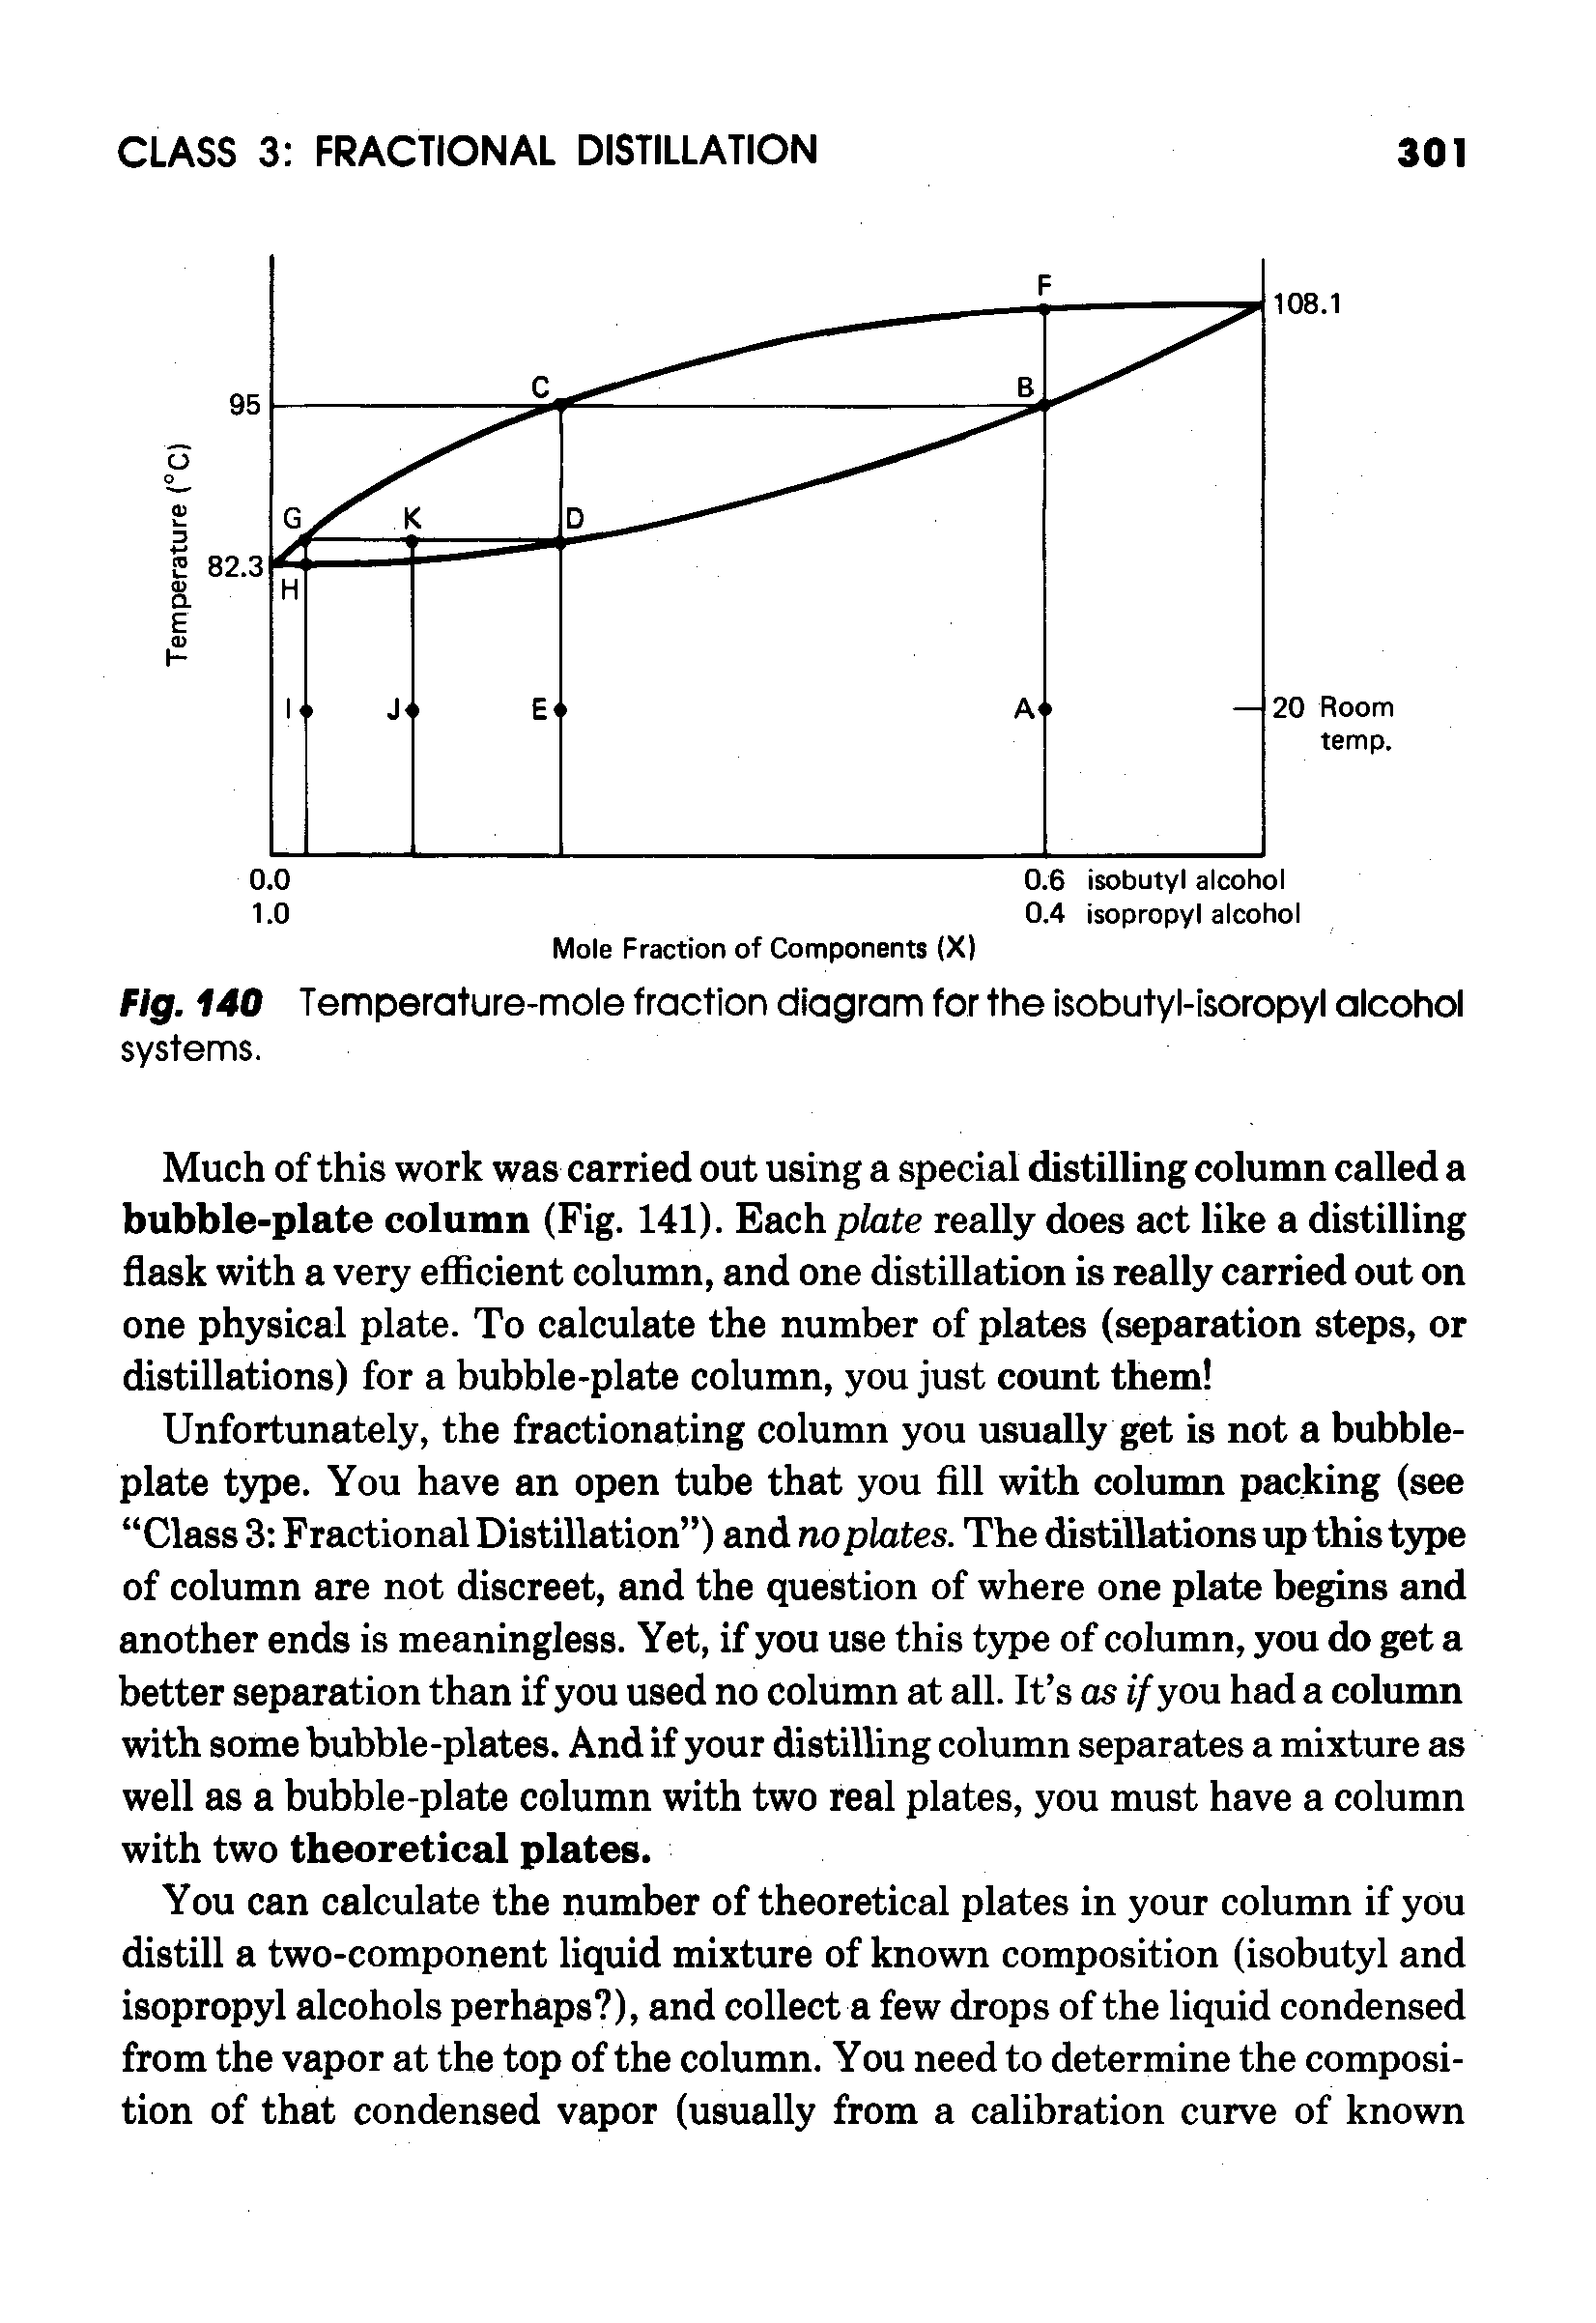 Fig. 140 Temperature-mole fraction diagram for the isobutyl-isoropyl alcohol systems.